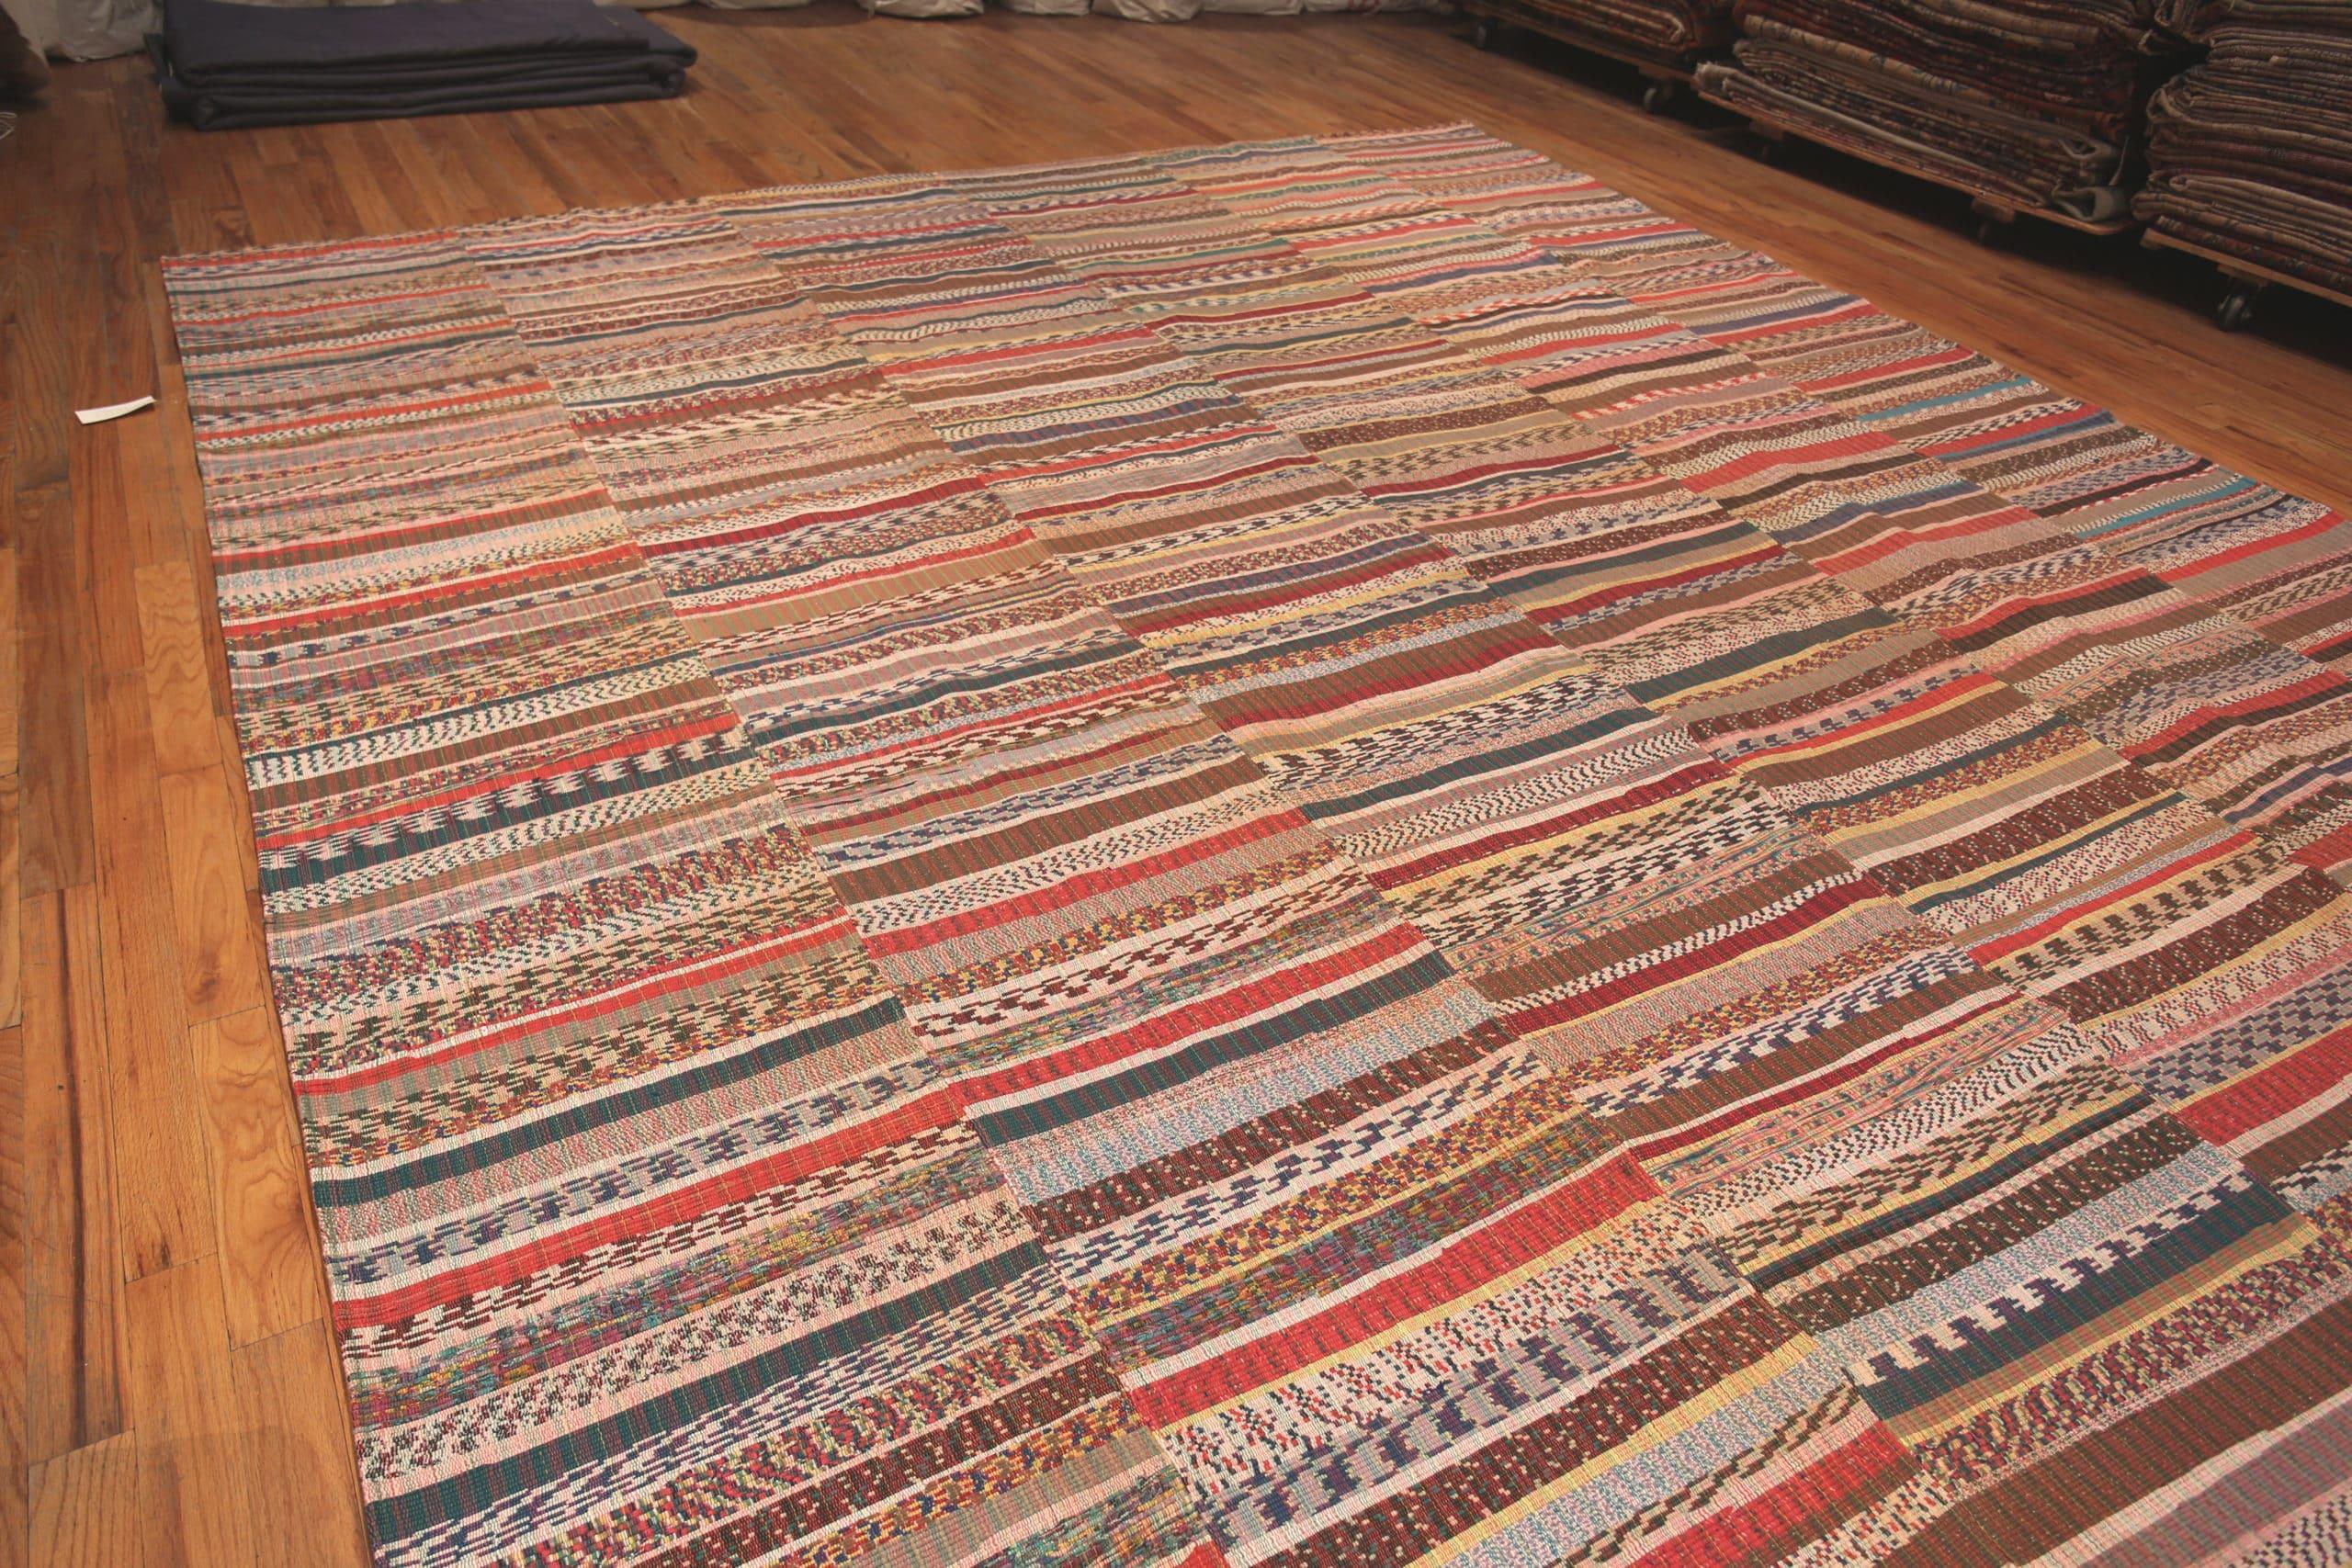 Stripped Modern Rag Rug, Country of Origin: Modern Turkish Rugs. Circa date: Modern. Size: 12 ft 10 in x 16 ft 2 in (3.91 m x 4.93 m)